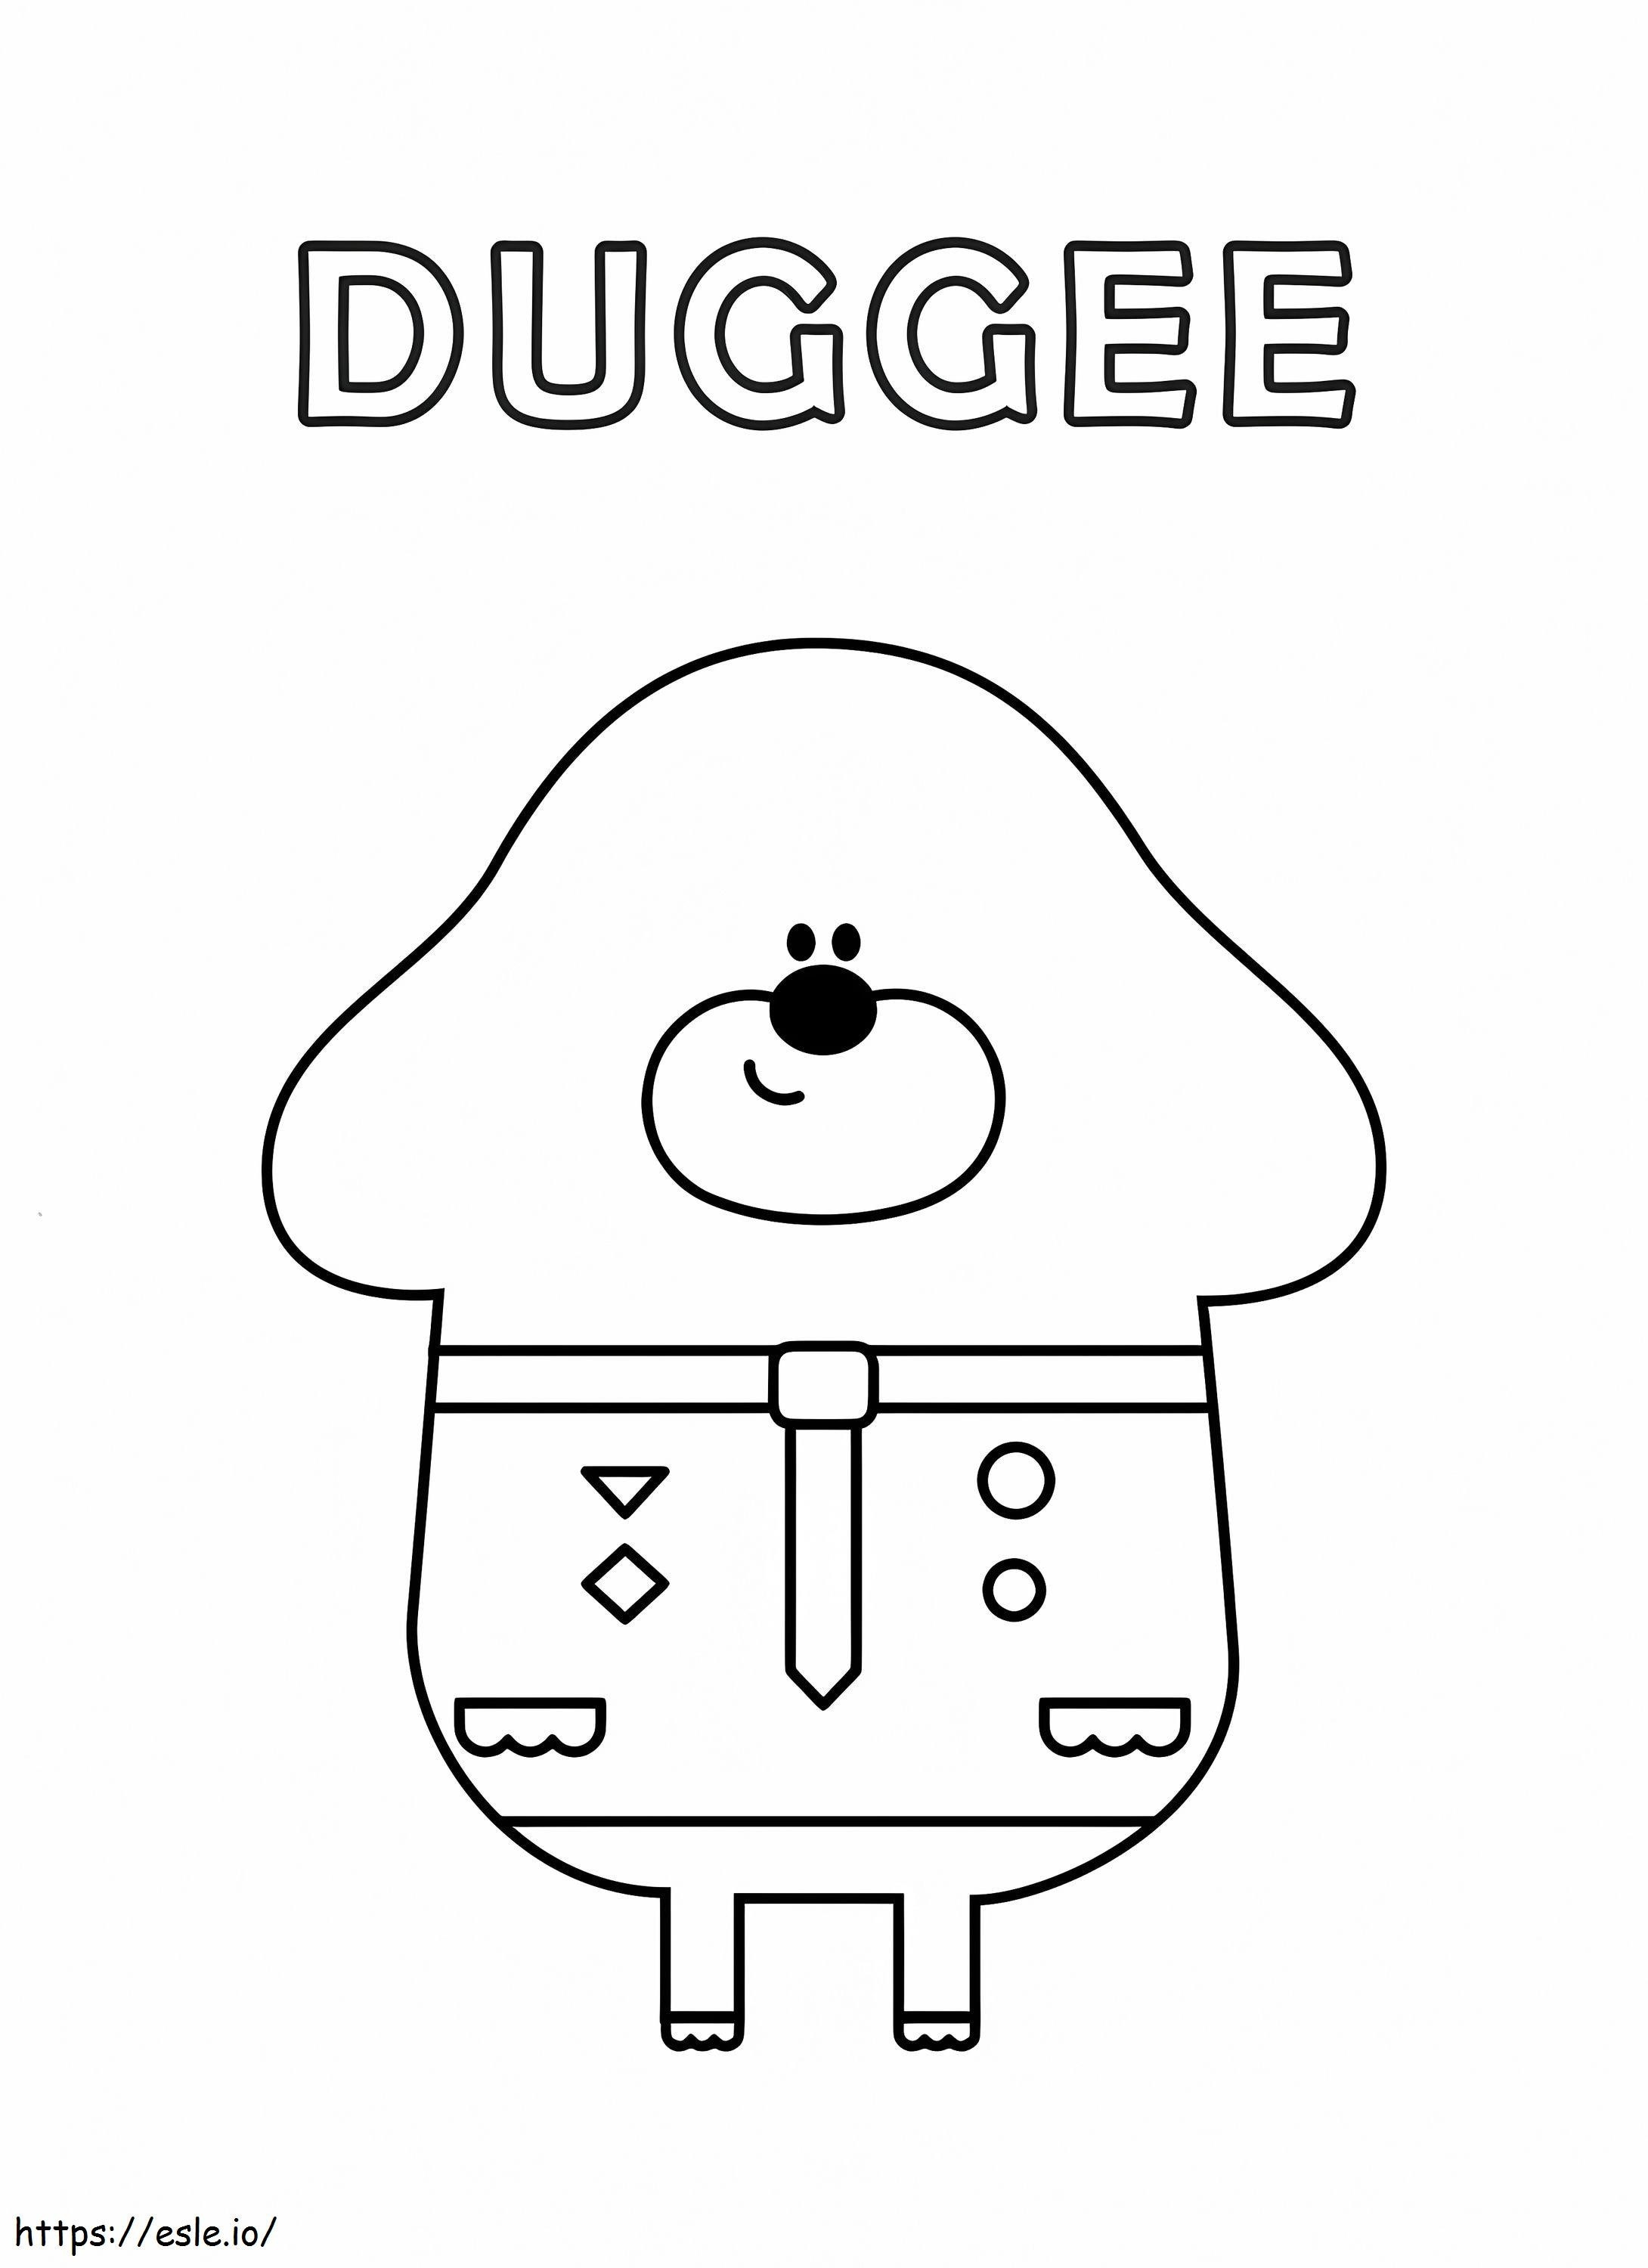 1580980517 Hey Duggee 7 coloring page